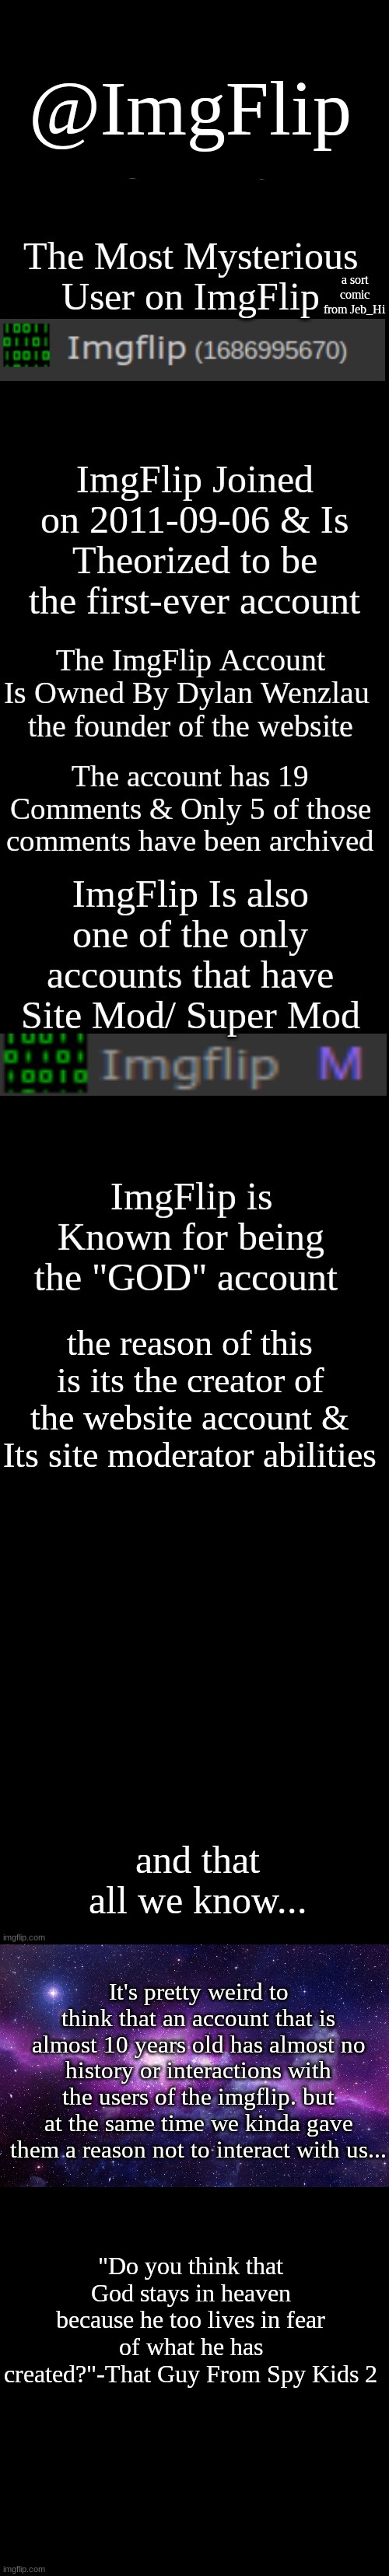 ImgFlip | @ImgFlip; a sort comic from Jeb_Hi; the reason of this is its the creator of the website account & Its site moderator abilities; and that all we know... It's pretty weird to think that an account that is almost 10 years old has almost no history or interactions with the users of the imgflip. but at the same time we kinda gave them a reason not to interact with us... "Do you think that God stays in heaven because he too lives in fear of what he has created?"-That Guy From Spy Kids 2 | image tagged in black plain template,theory | made w/ Imgflip meme maker